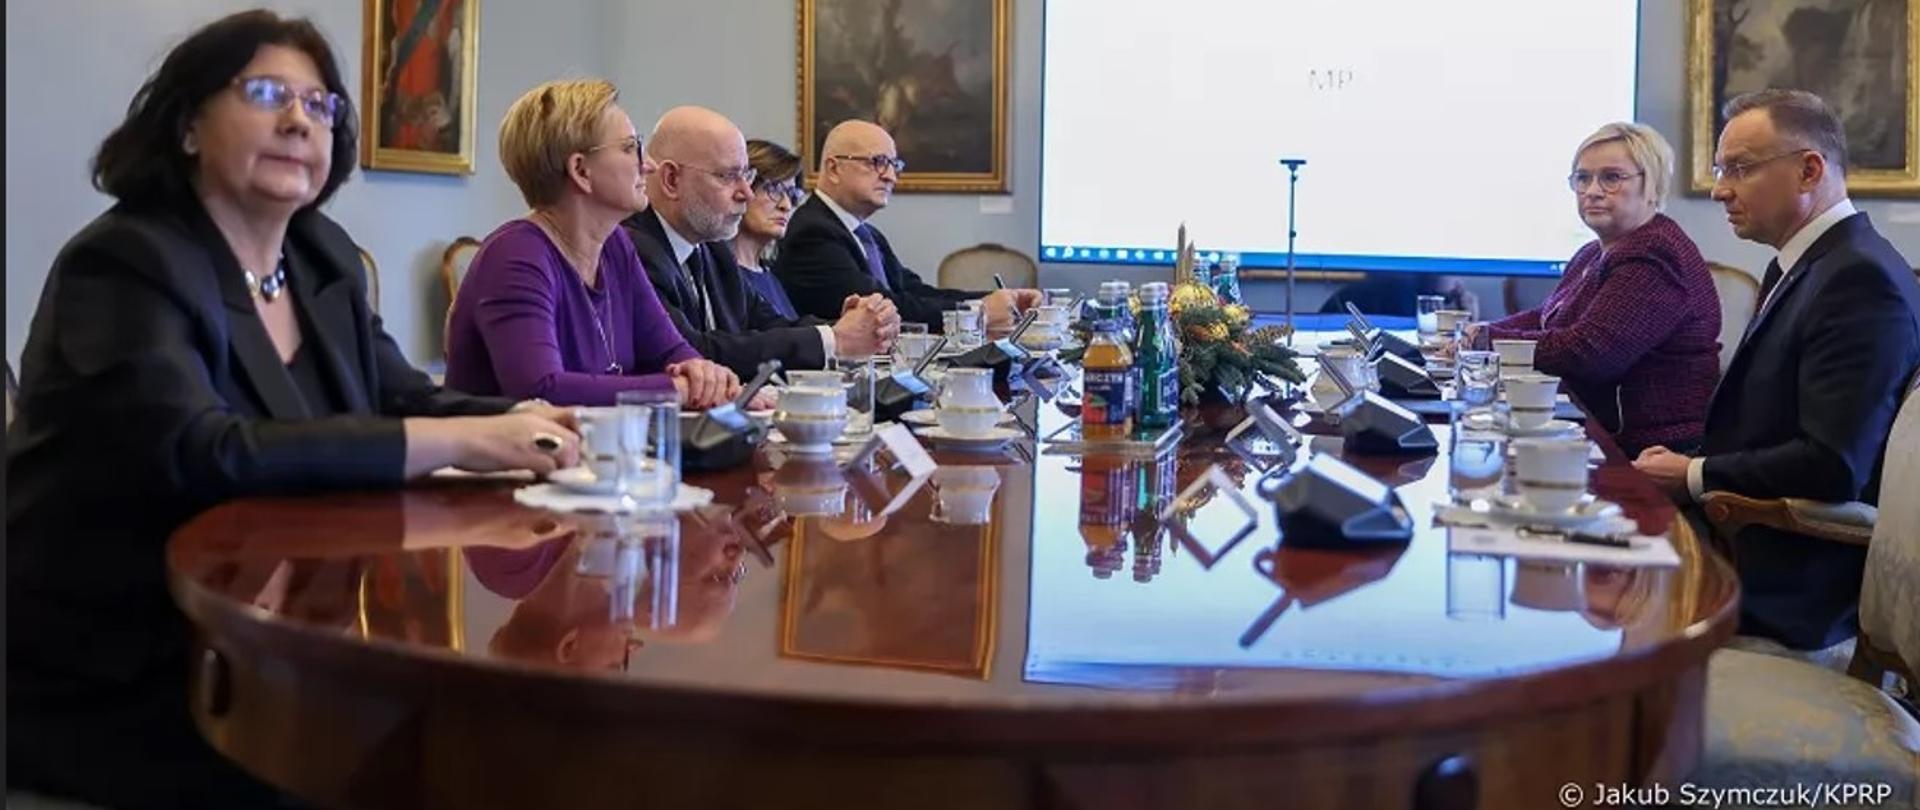 National Broadcasting Council (KRRiT) Meeting with the President of the Republic of Poland